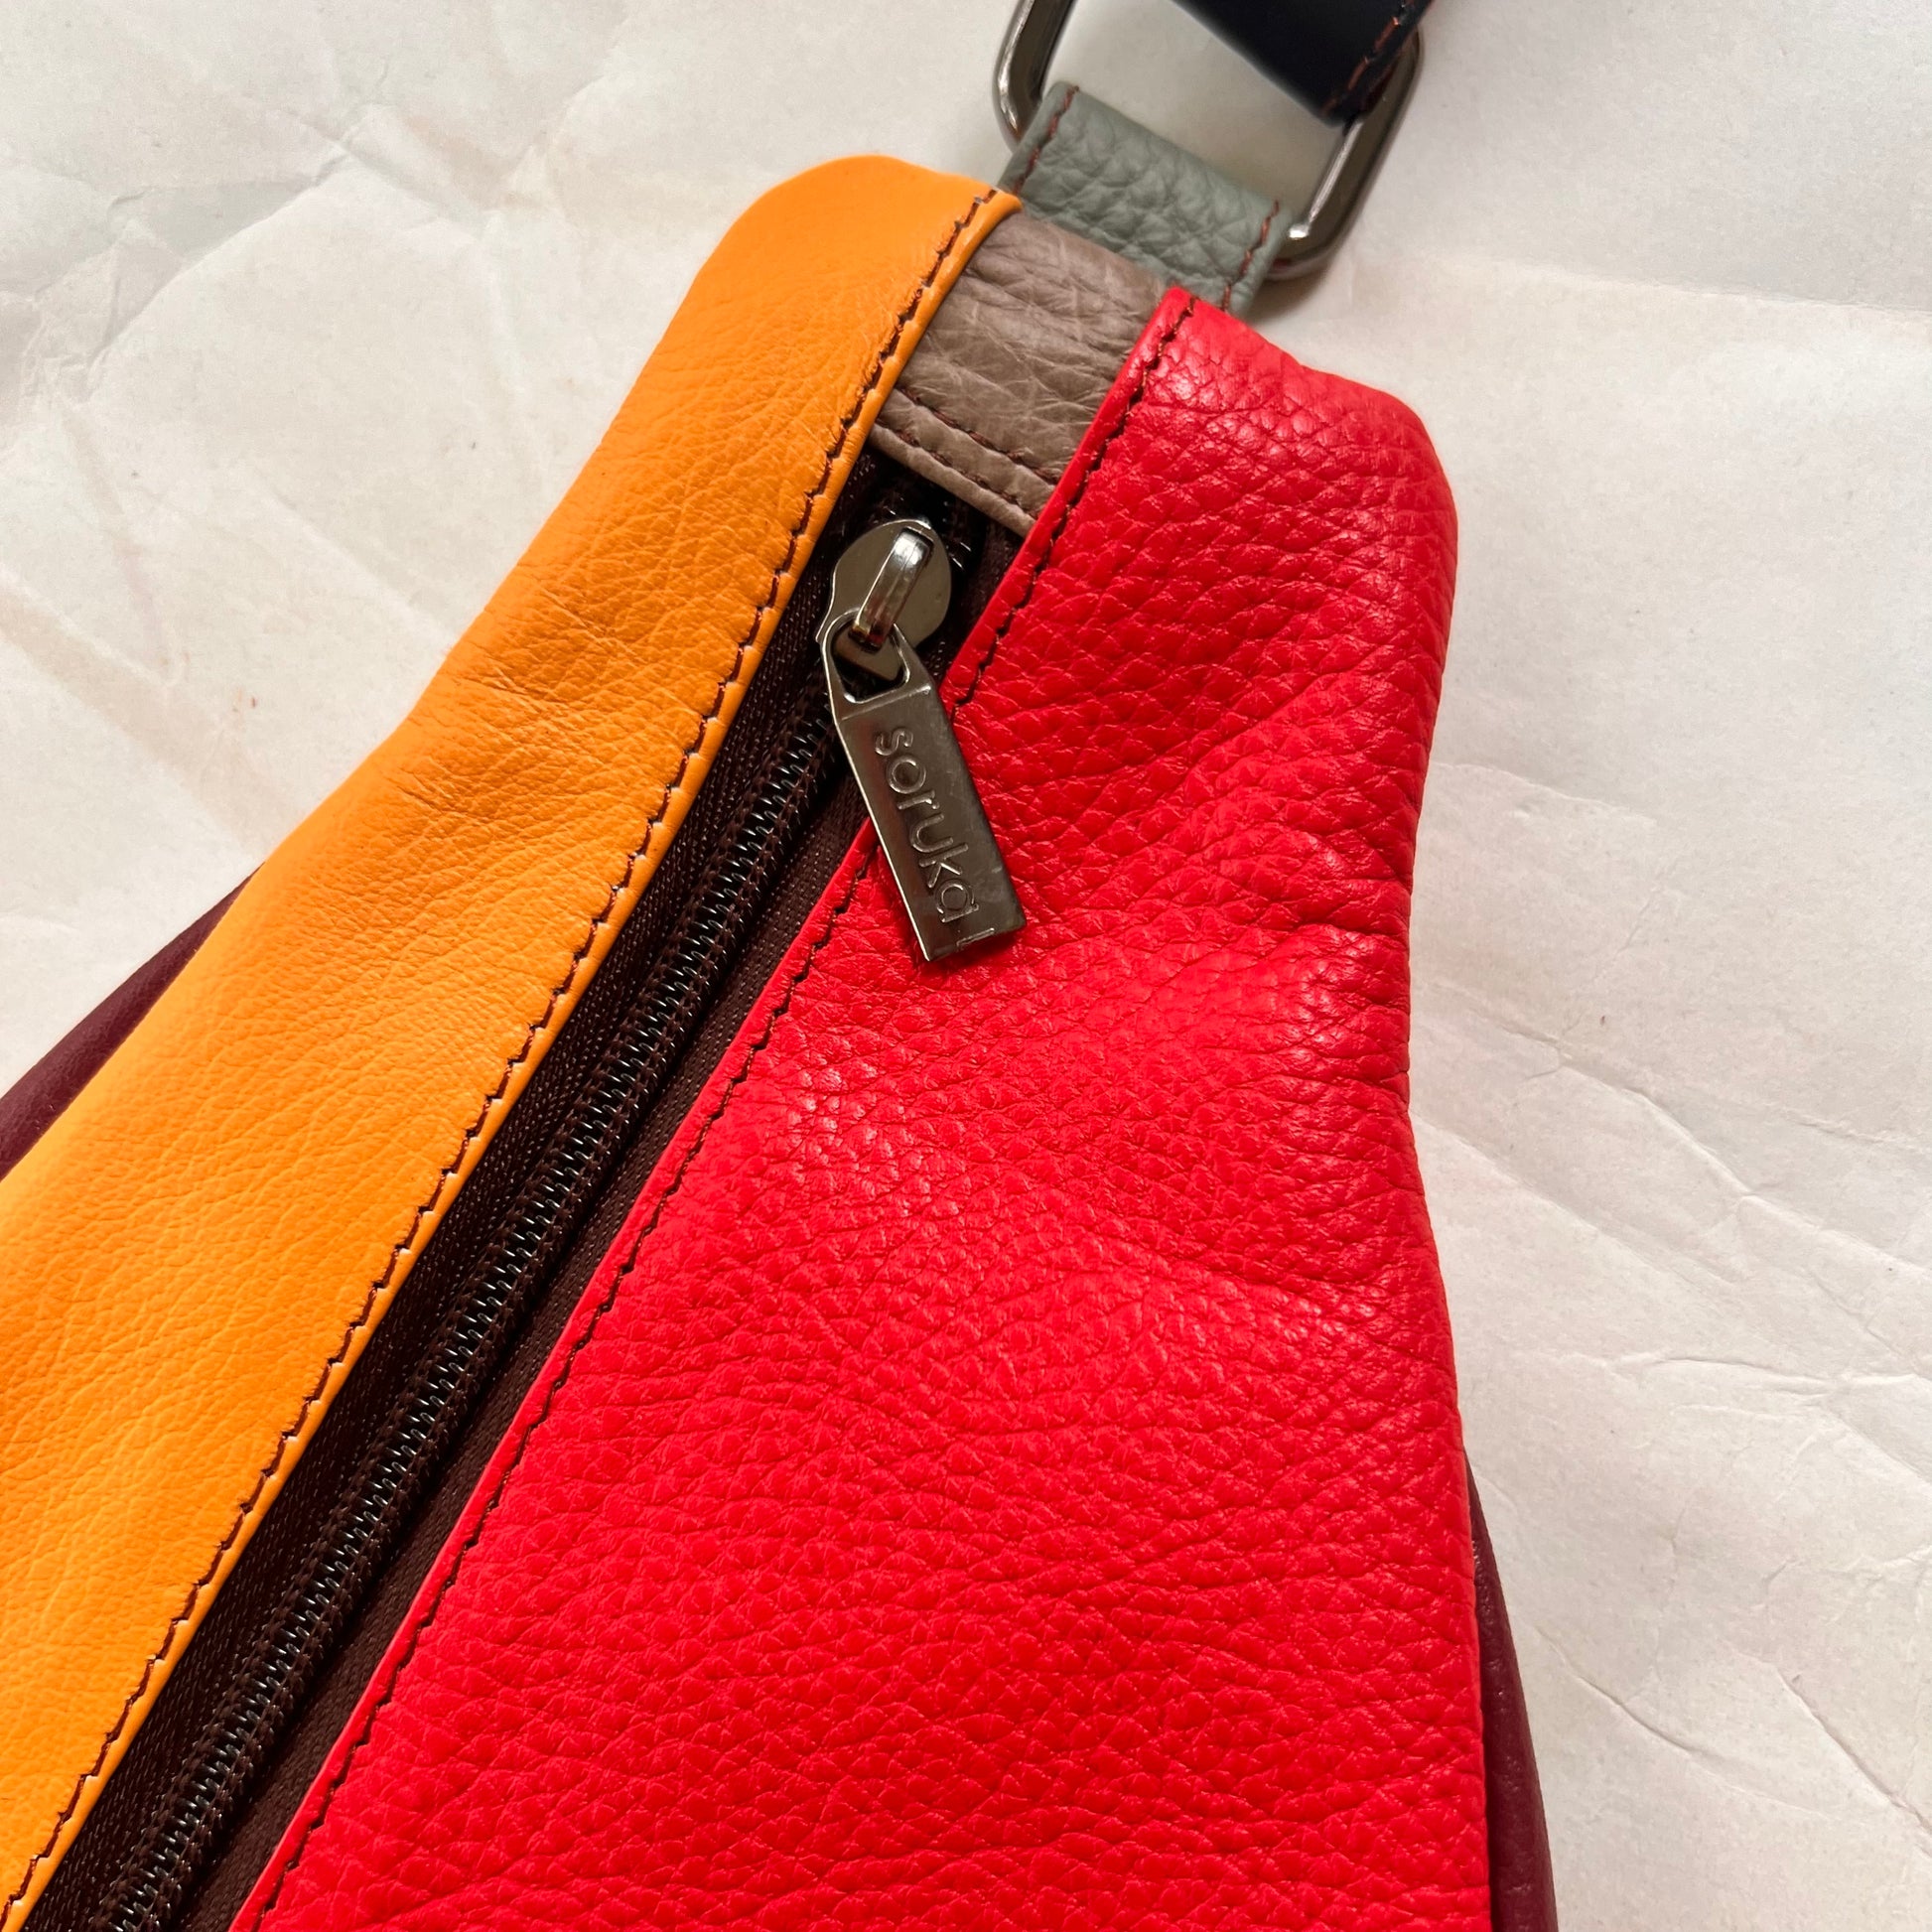 close-up of top of roxi sling bag showing zipper pull.